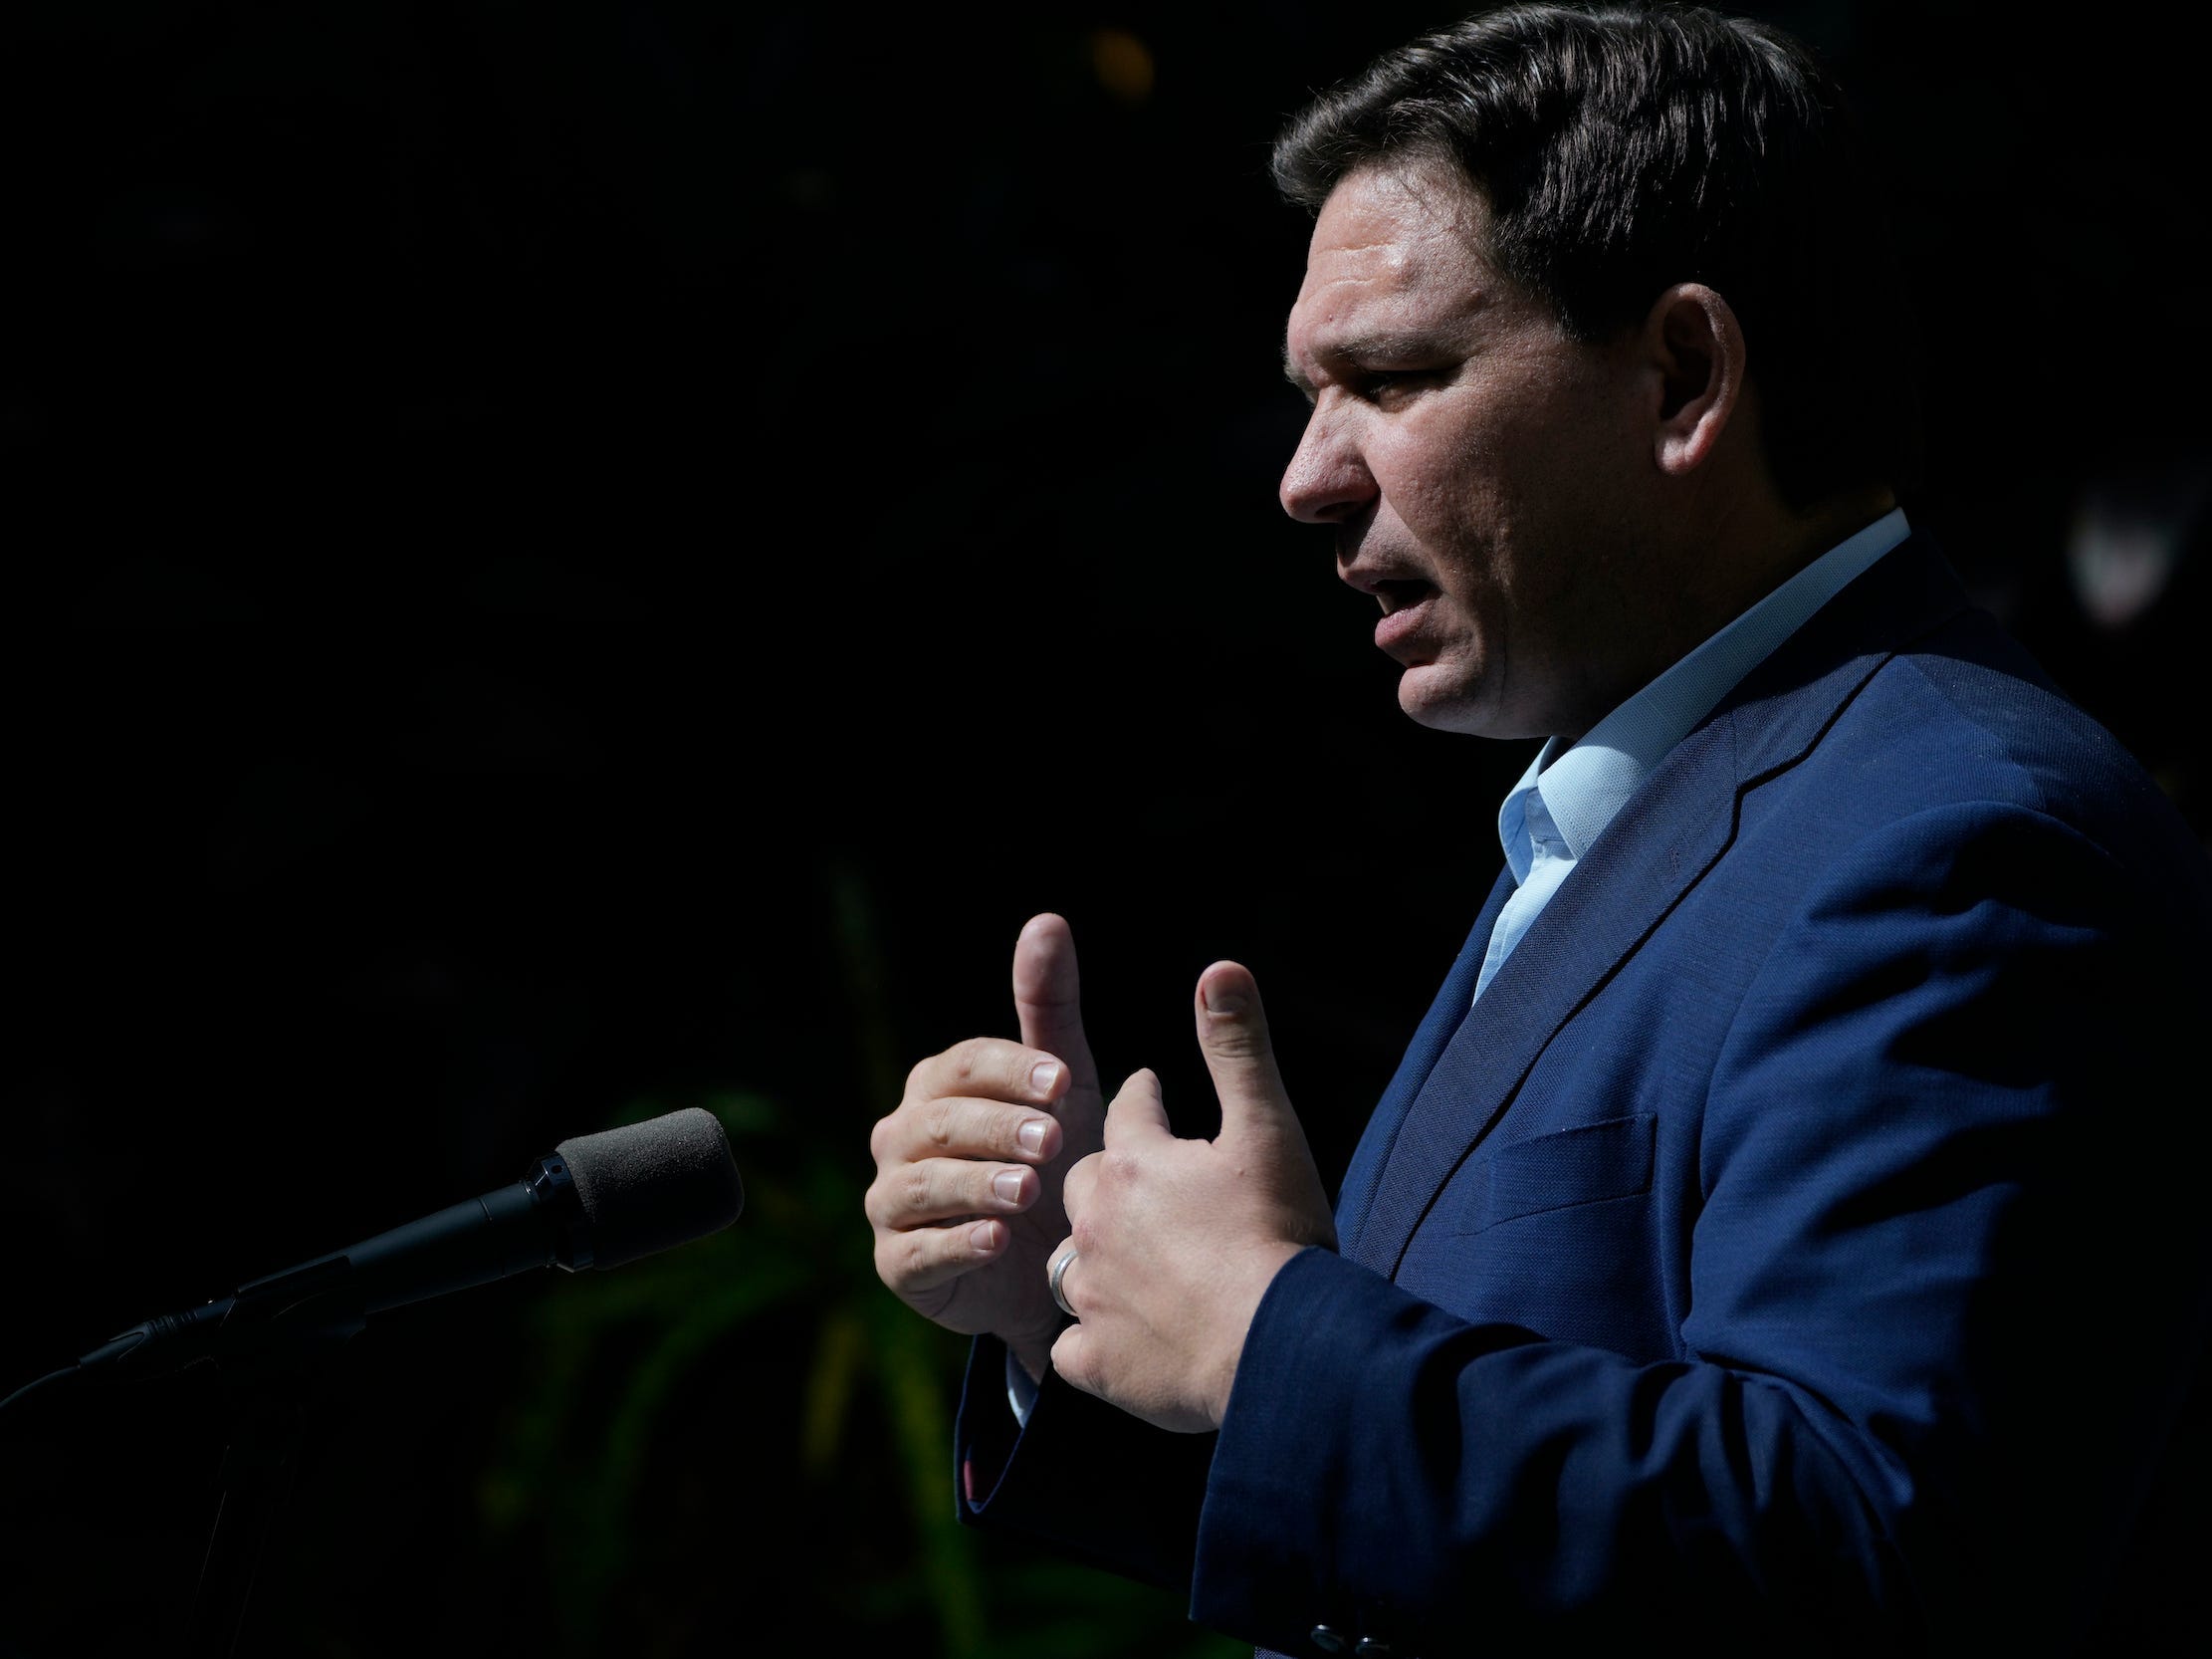 Florida Gov. Ron DeSantis is polling well and has a lot of name recognition, and so Republican insiders are eagerly awaiting signs that he'll run for president.